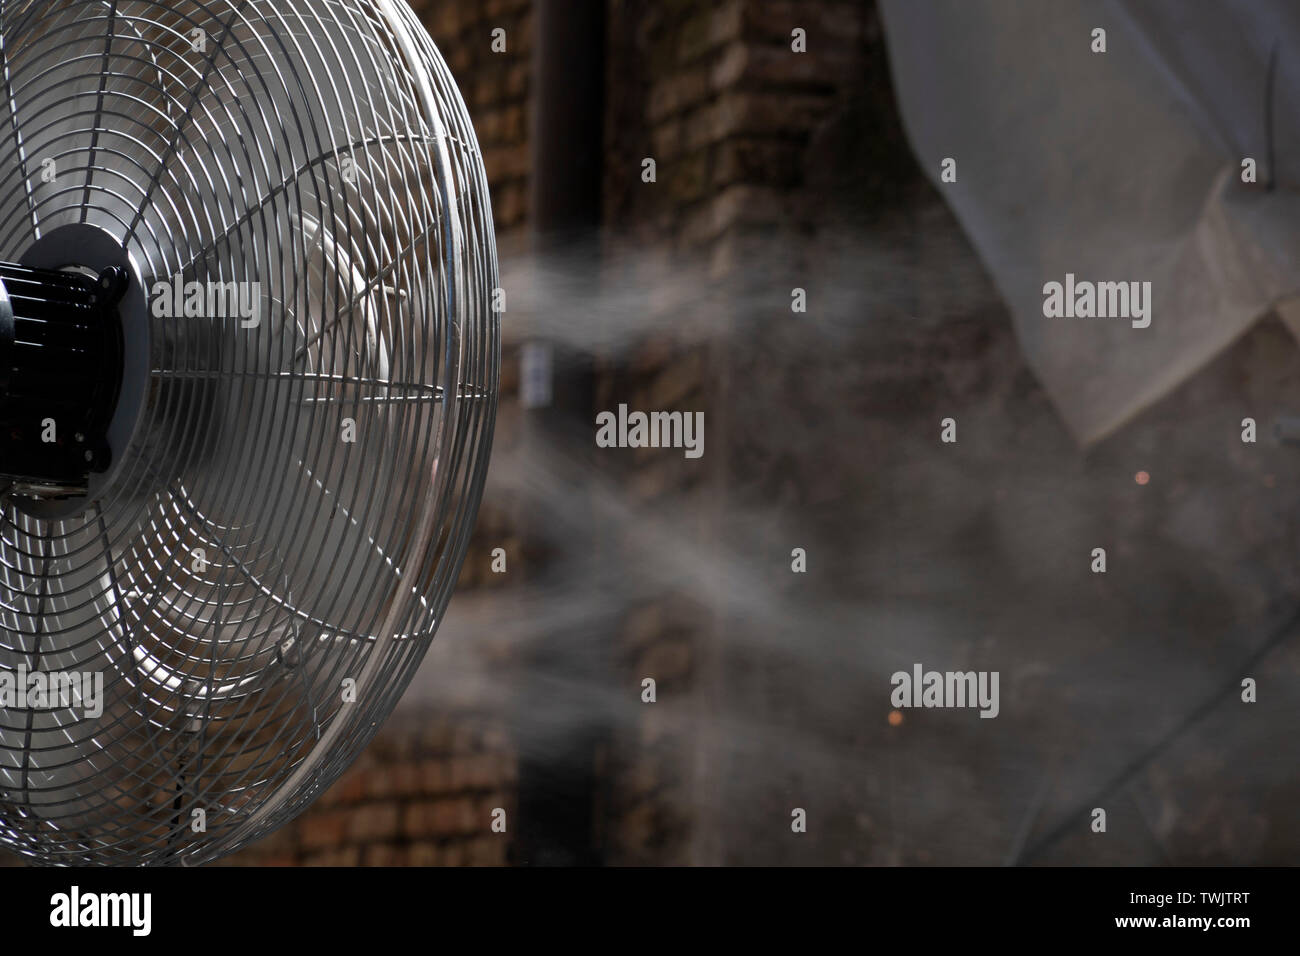 refresher fan with cold water spray detail Stock Photo